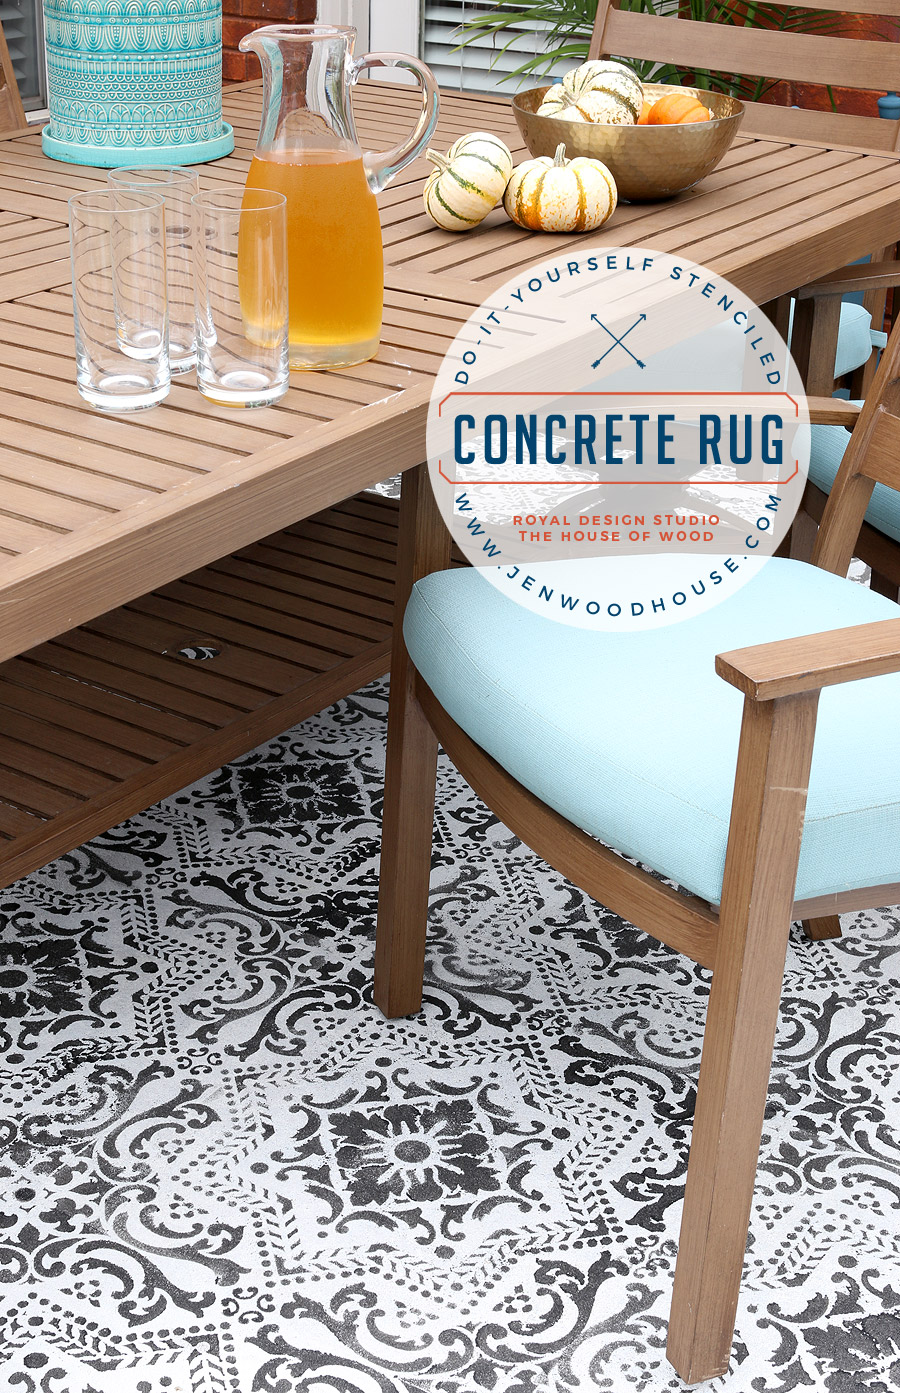 How to create a faux patio rug with stencils and concrete stain via Jen Woodhouse